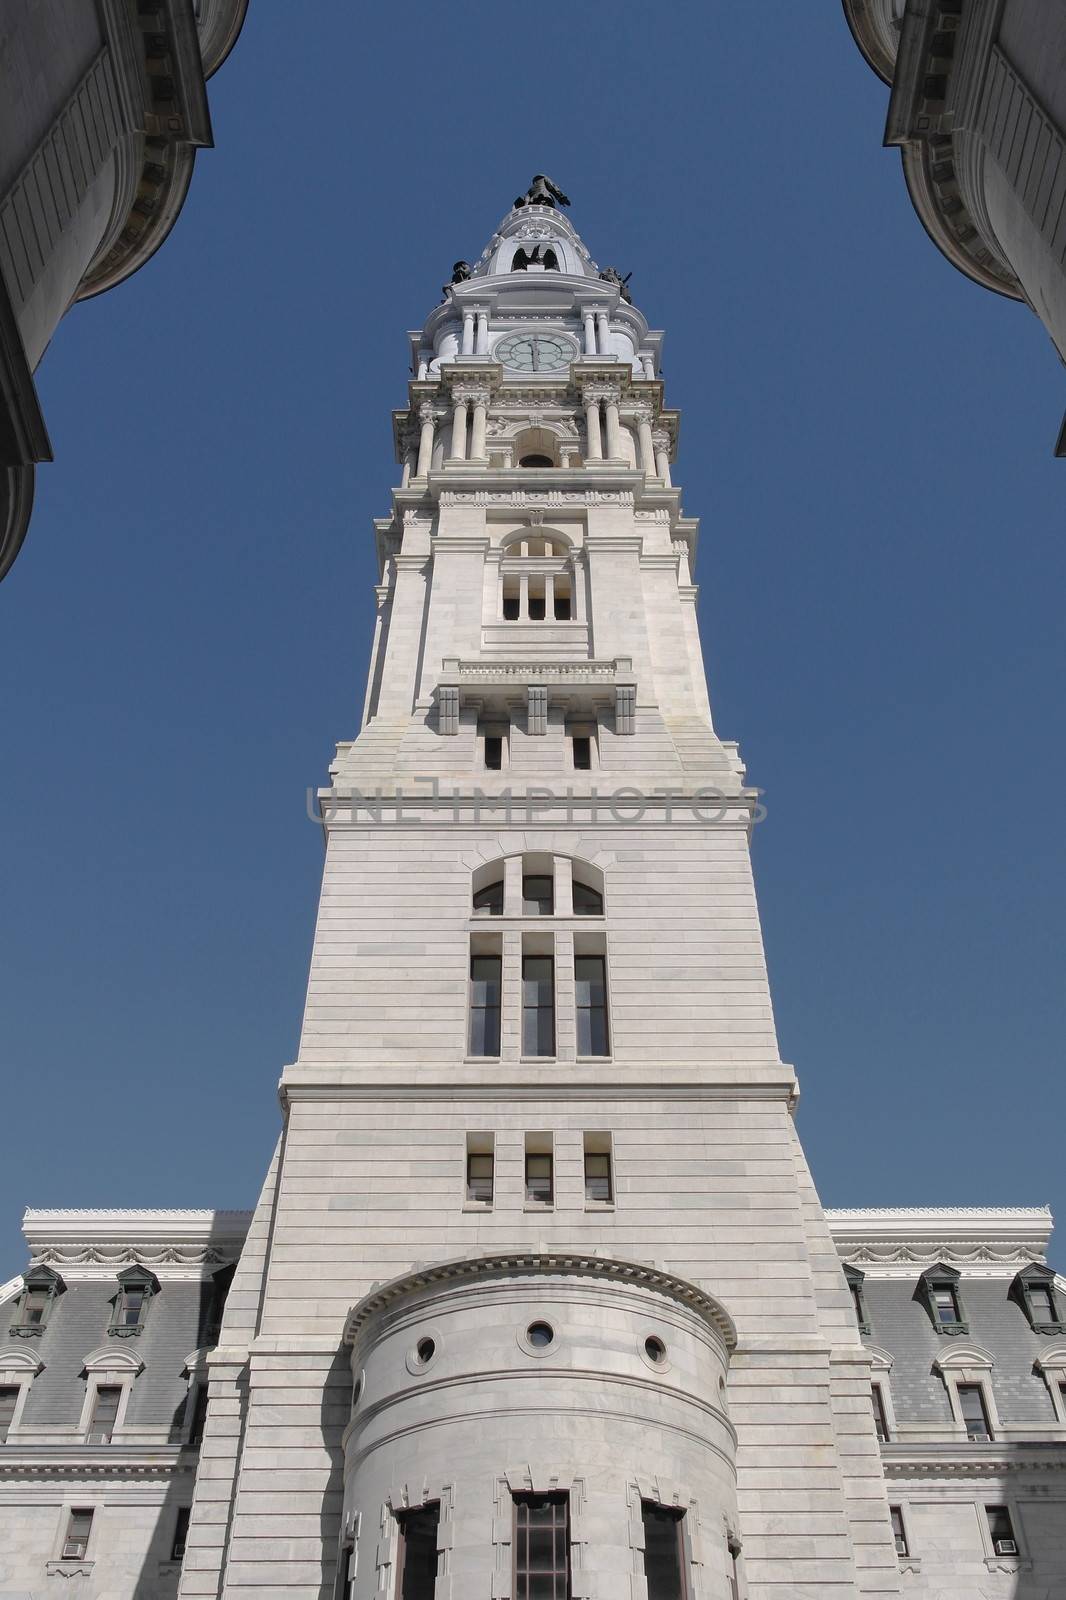 City hall in Downtown Philadelpia